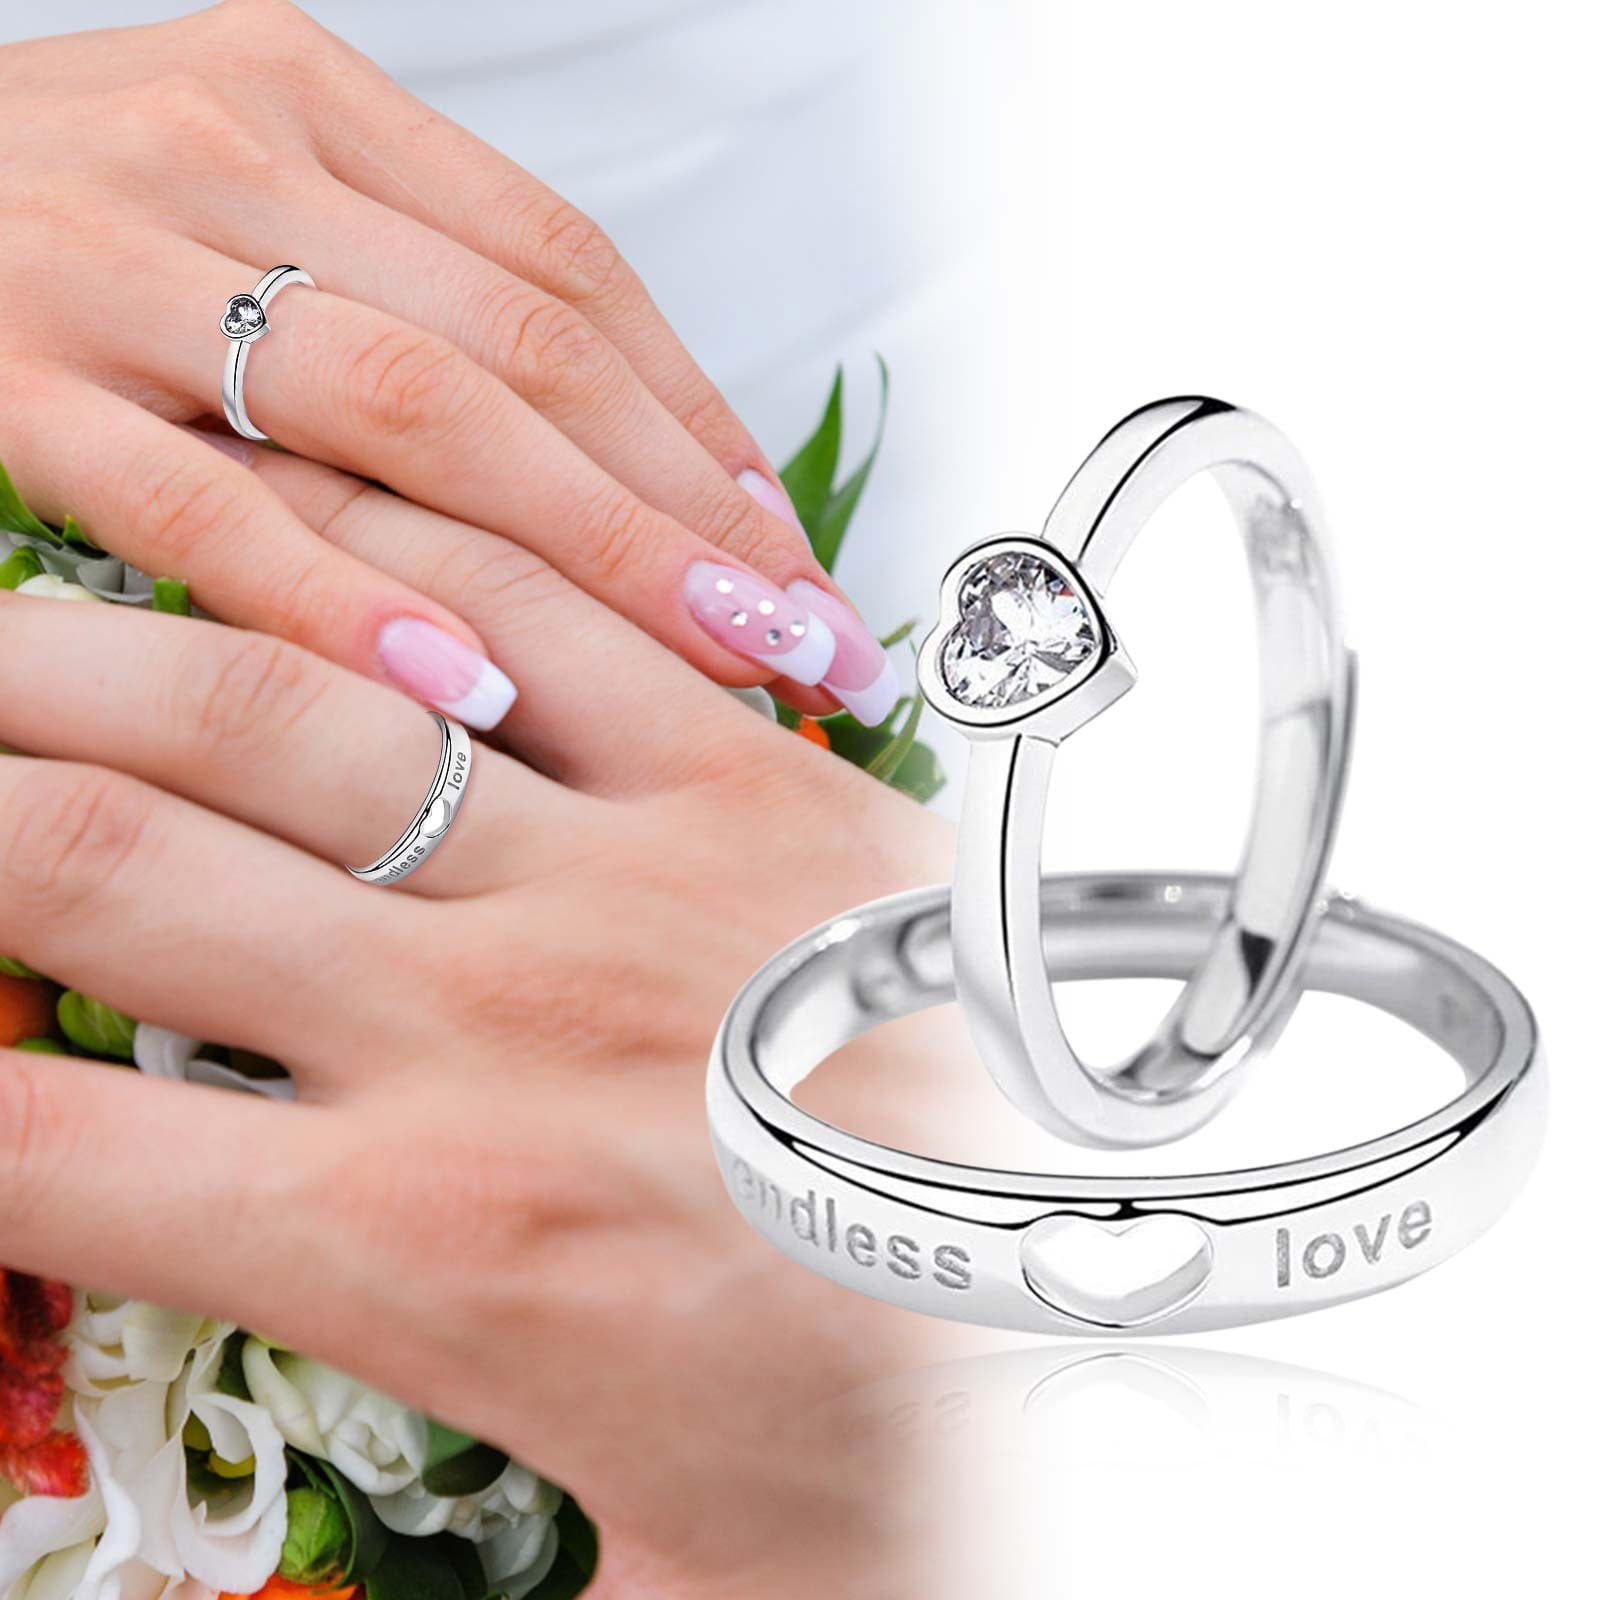 Womens Rings Fit Heart And Engagement Matching Comfort Ring Her High Polished For Couples Rings Wedding Promise Sets For Him Band Rings dc89f443 49d9 4e64 8d0c ccd6f37c8b13.4bc78b2b273fec226debe29876d63146